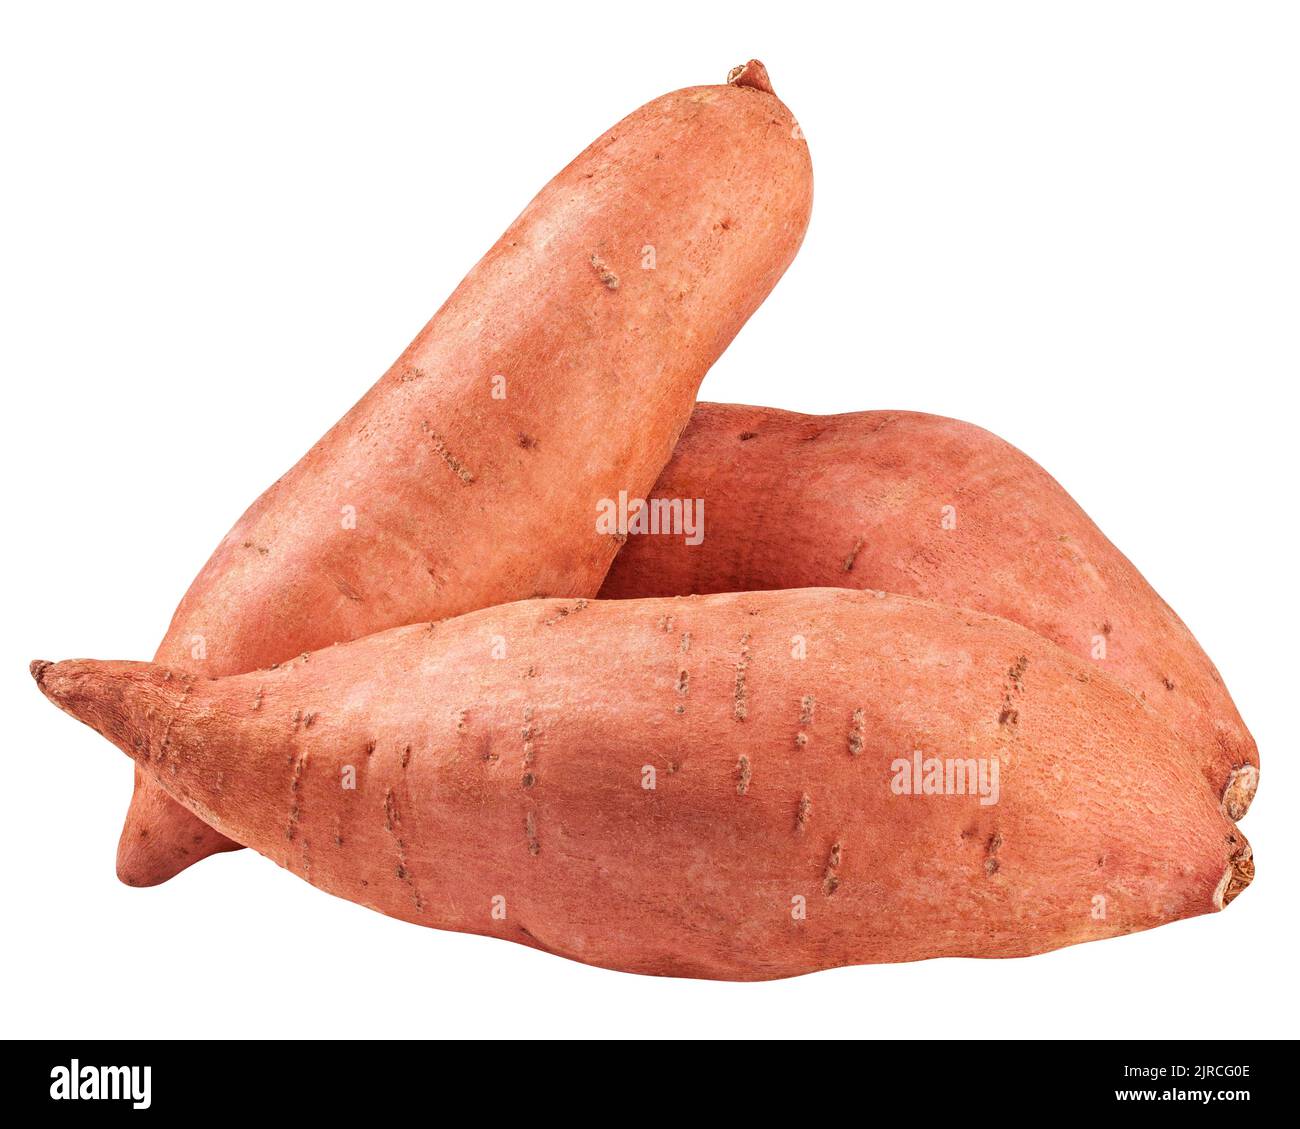 sweet potato, yam, isolated on white background, clipping path, full depth of field Stock Photo